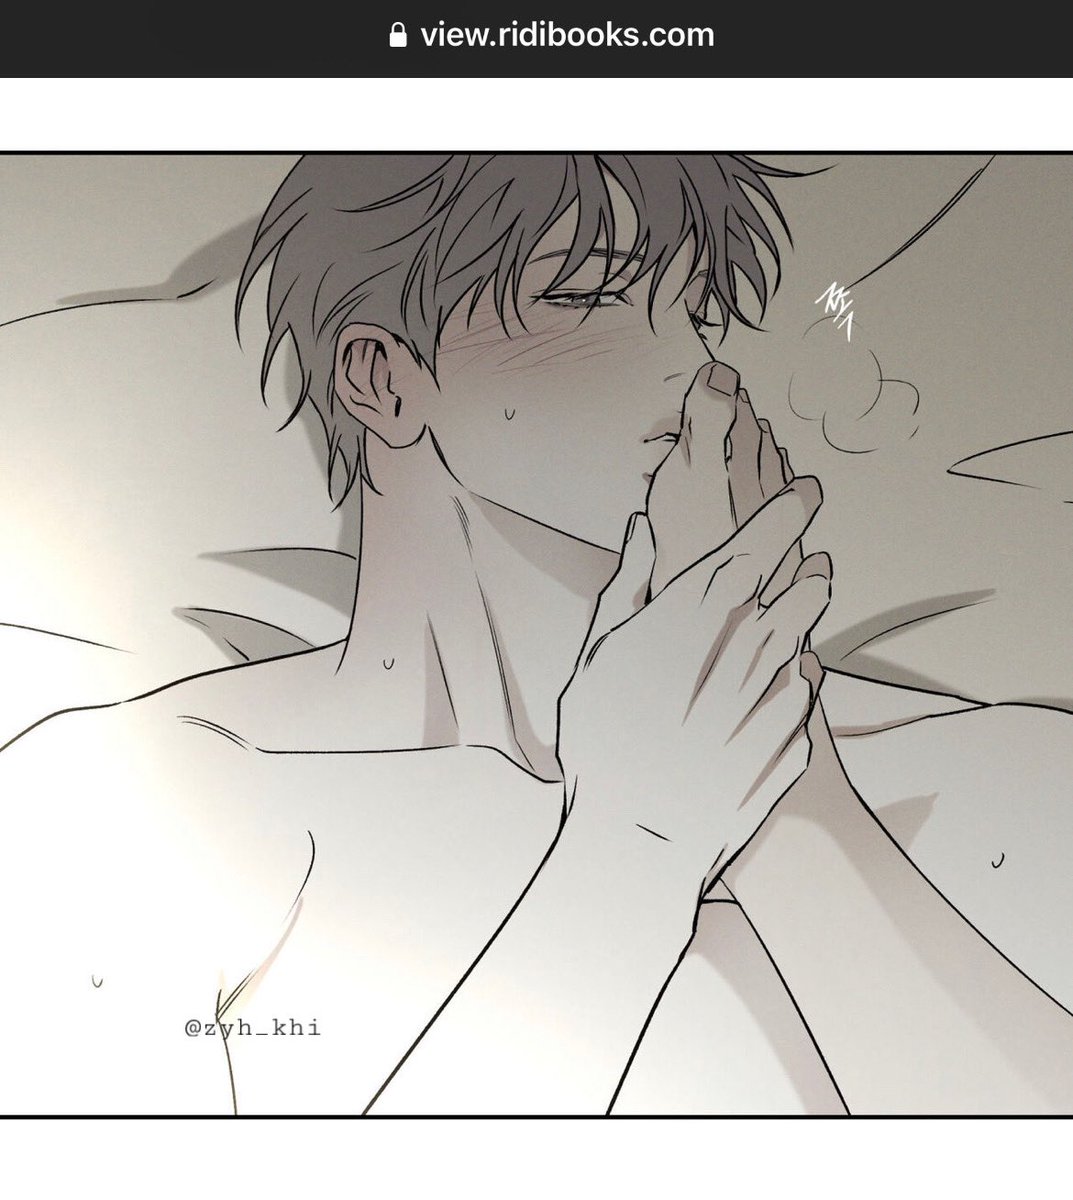 S : “I really, really like you a lot, damn, even after getting fucked in the ass, seeing something so amazing like this…” 🥵🥵

W : “seoan-ah…don't push me away...” 💦🥵🥵🥵

HOT DAMNNN 😫😫

#피자배달부와골드팰리스
#thepizzadeliverymanandthegoldpalace